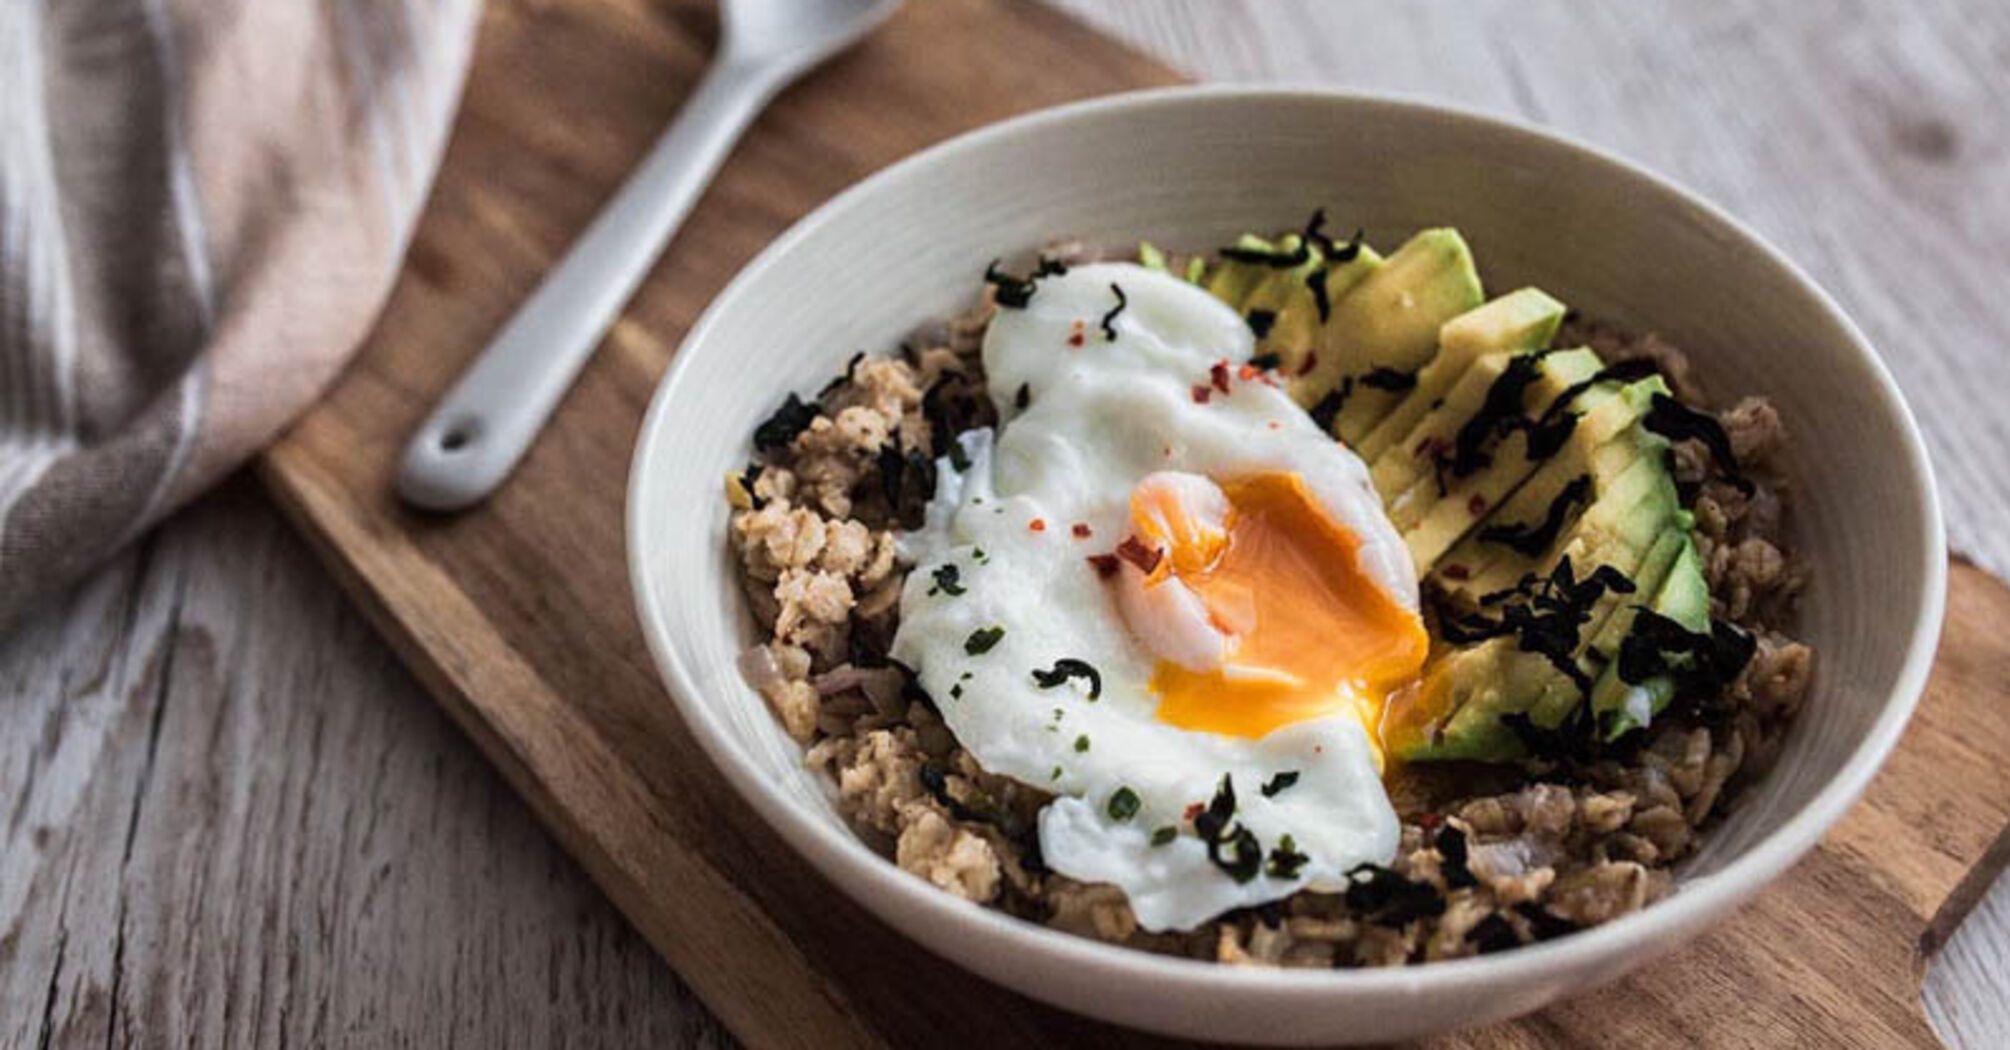 Breakfast in 10 minutes: oatmeal with avocado and poached egg